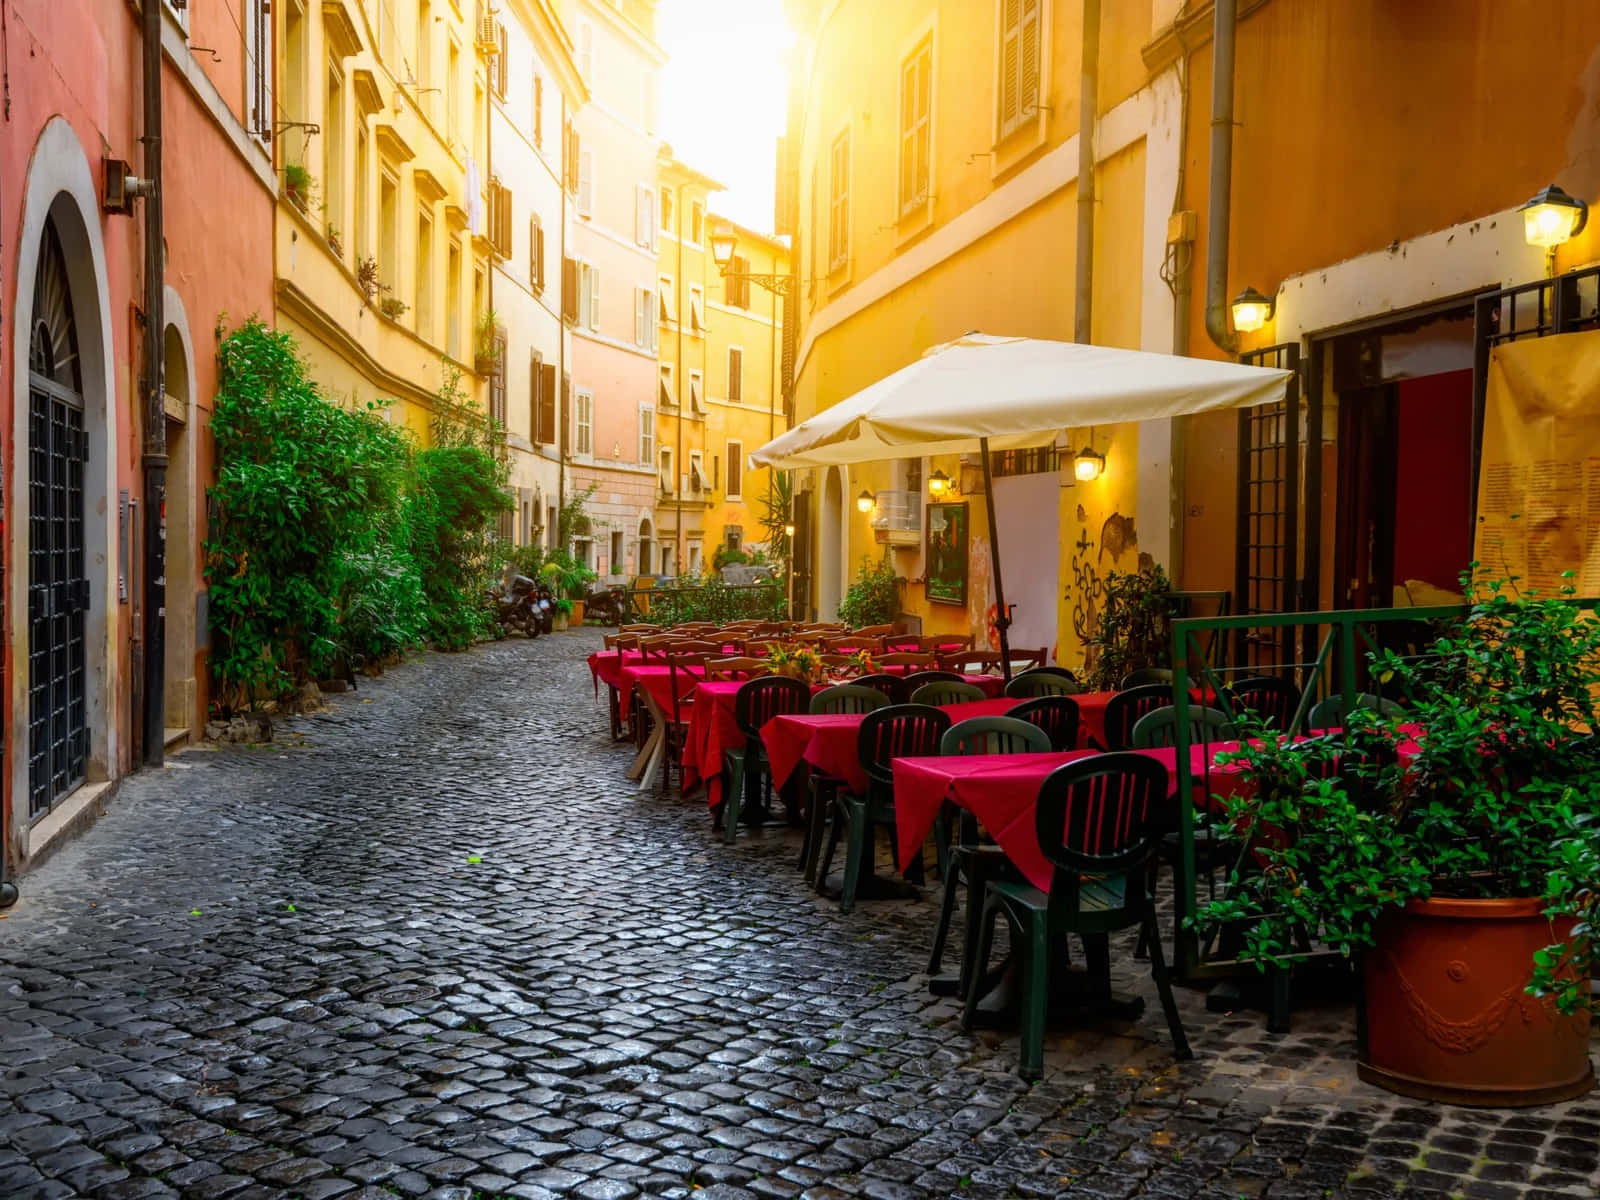 A Cobblestone Street With Tables And Chairs